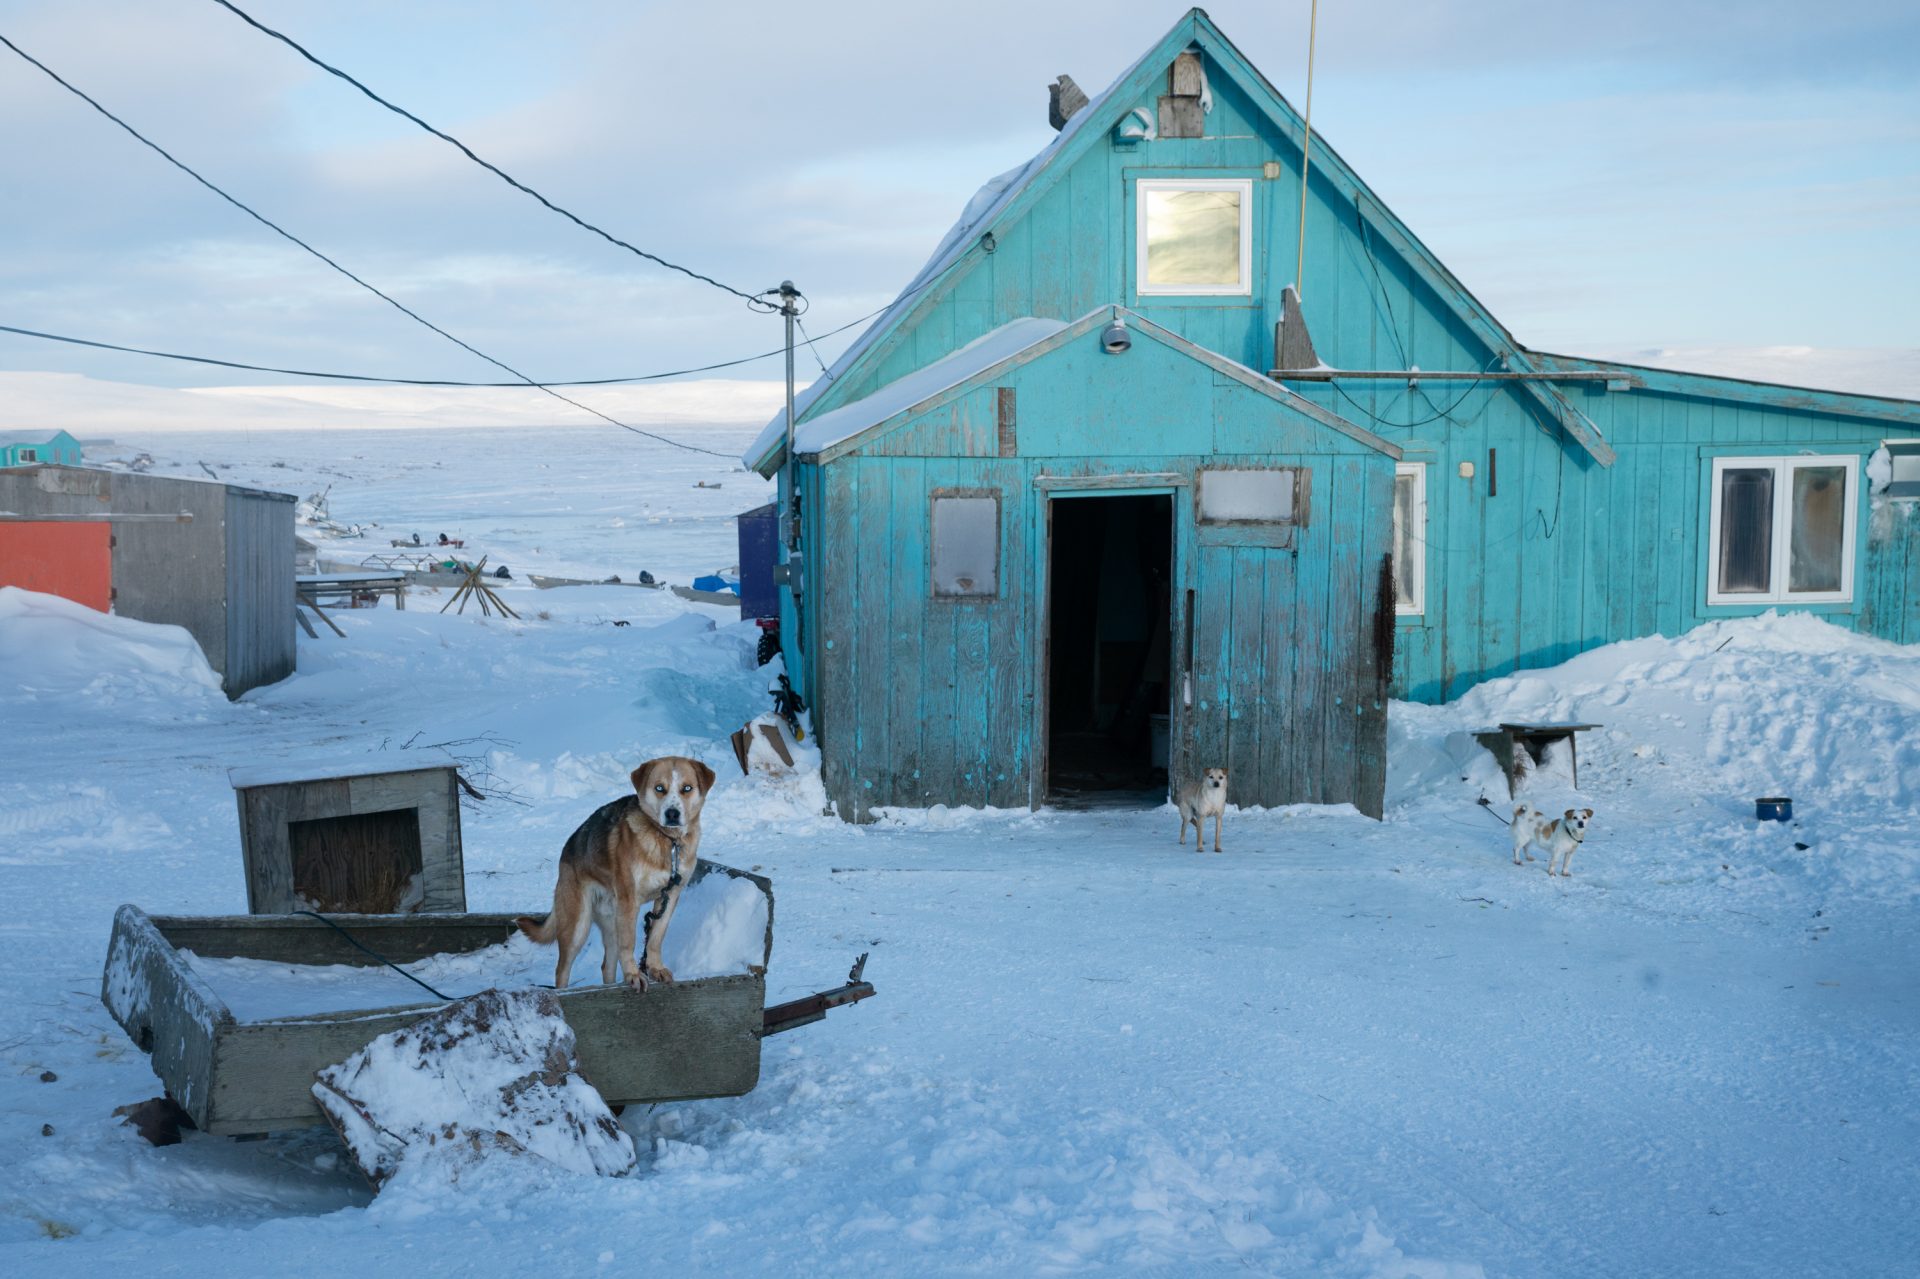 Older residents still remember when they moved their homes, pulled by dog sled, from neighboring Nightmute, Alaska, to make what was once a fishing camp into a permanent settlement. Now dogs abound, but the moving of goods is mainly done with snow machines and all-terrain vehicles.